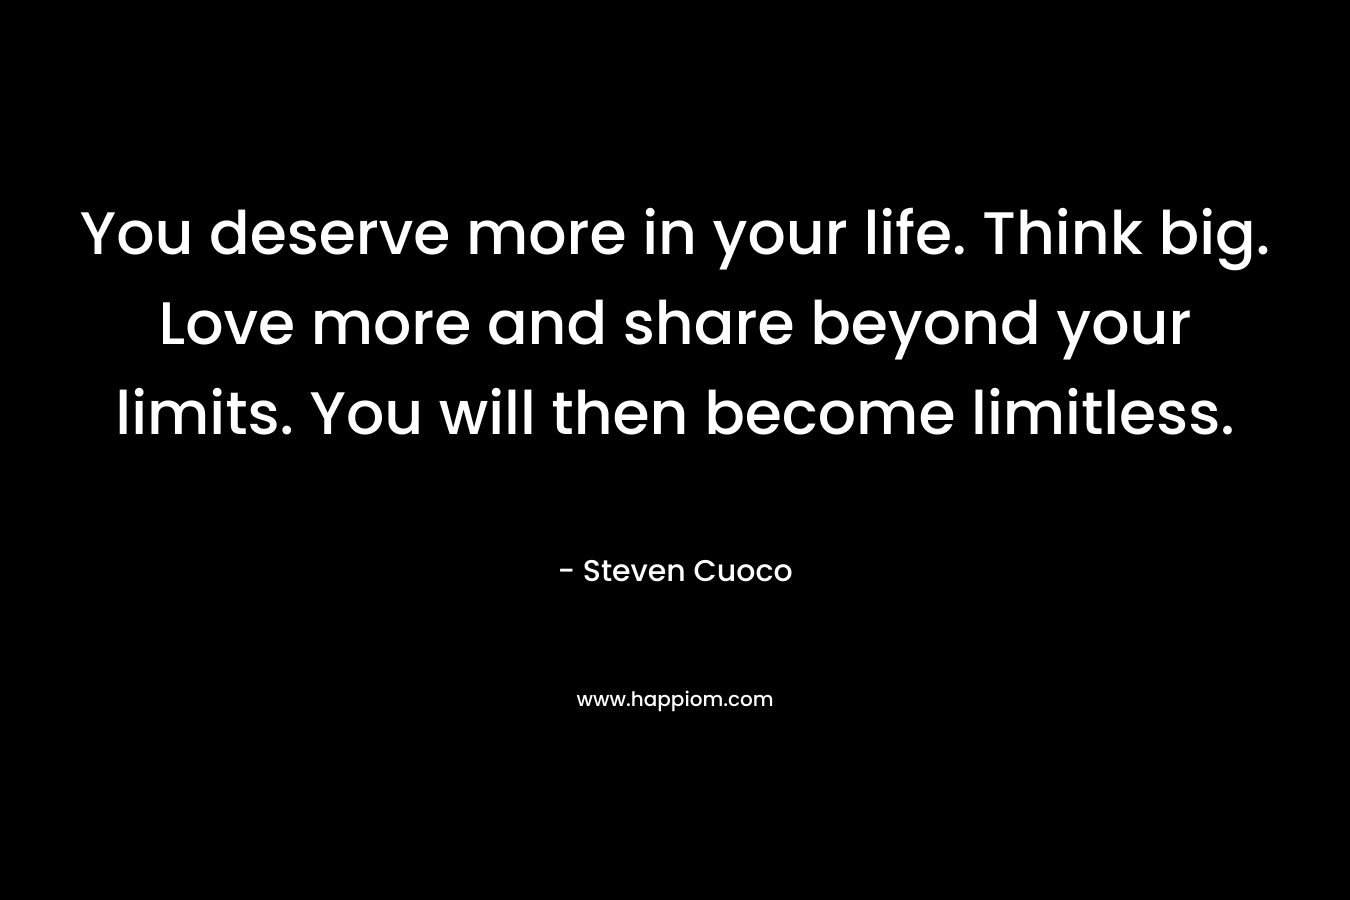 You deserve more in your life. Think big. Love more and share beyond your limits. You will then become limitless.